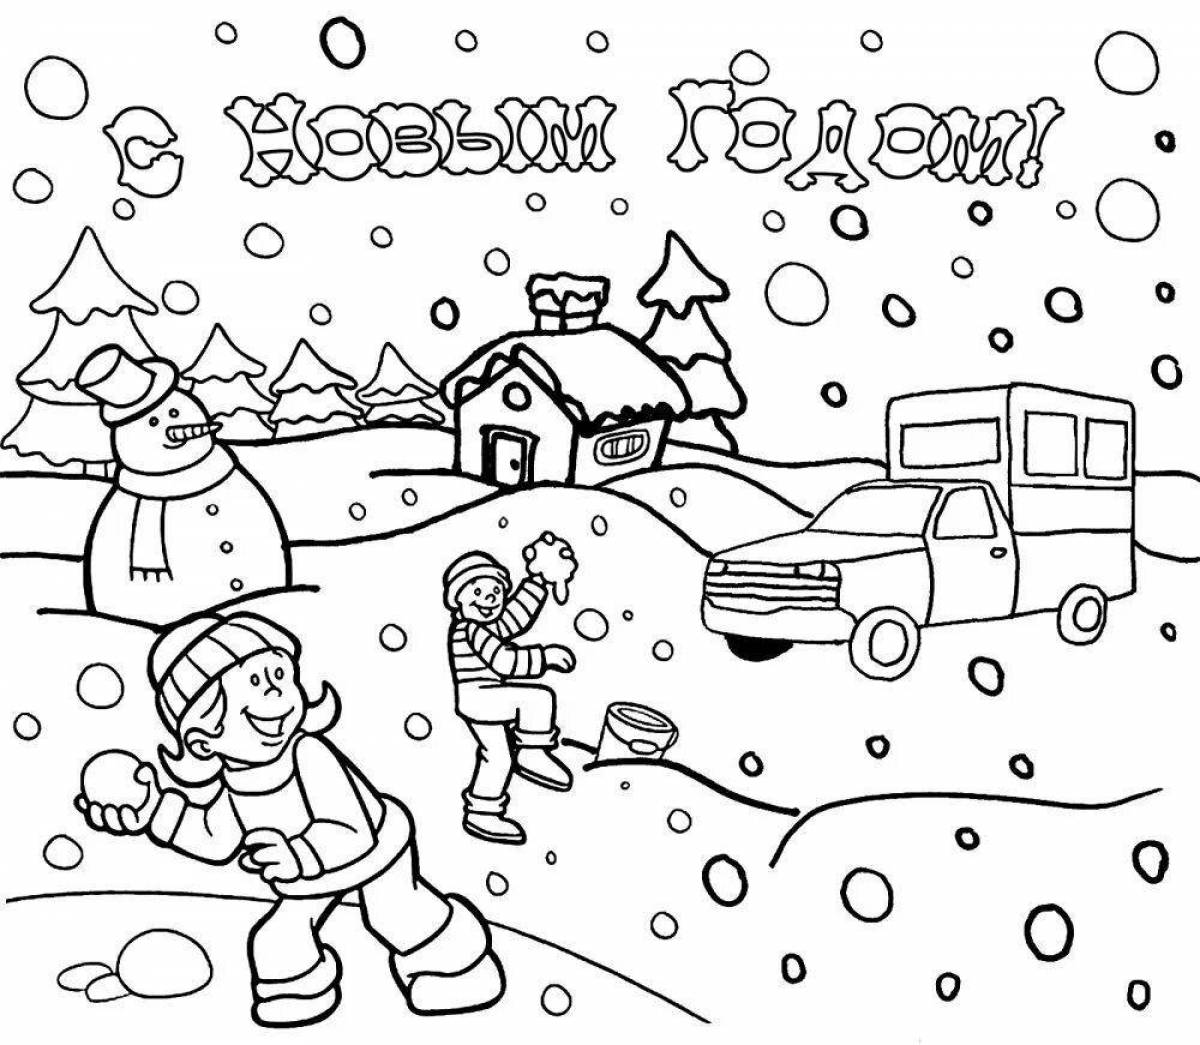 Amazing winter coloring book for kids